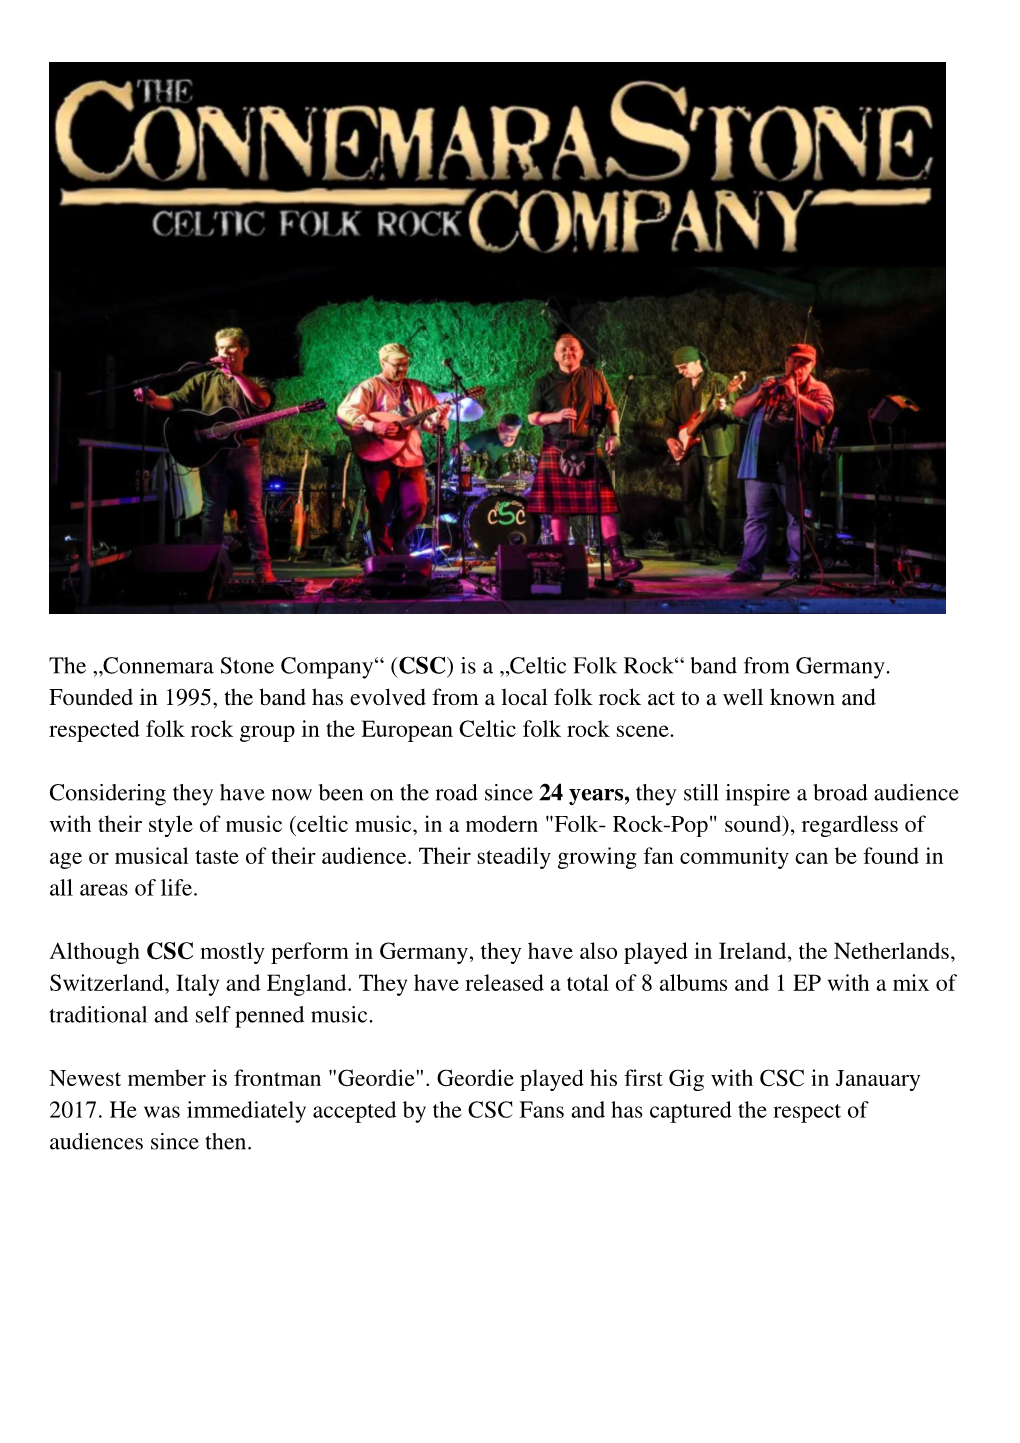 The „Connemara Stone Company“ (CSC) Is a „Celtic Folk Rock“ Band from Germany. Founded in 1995, the Band Has Evolved